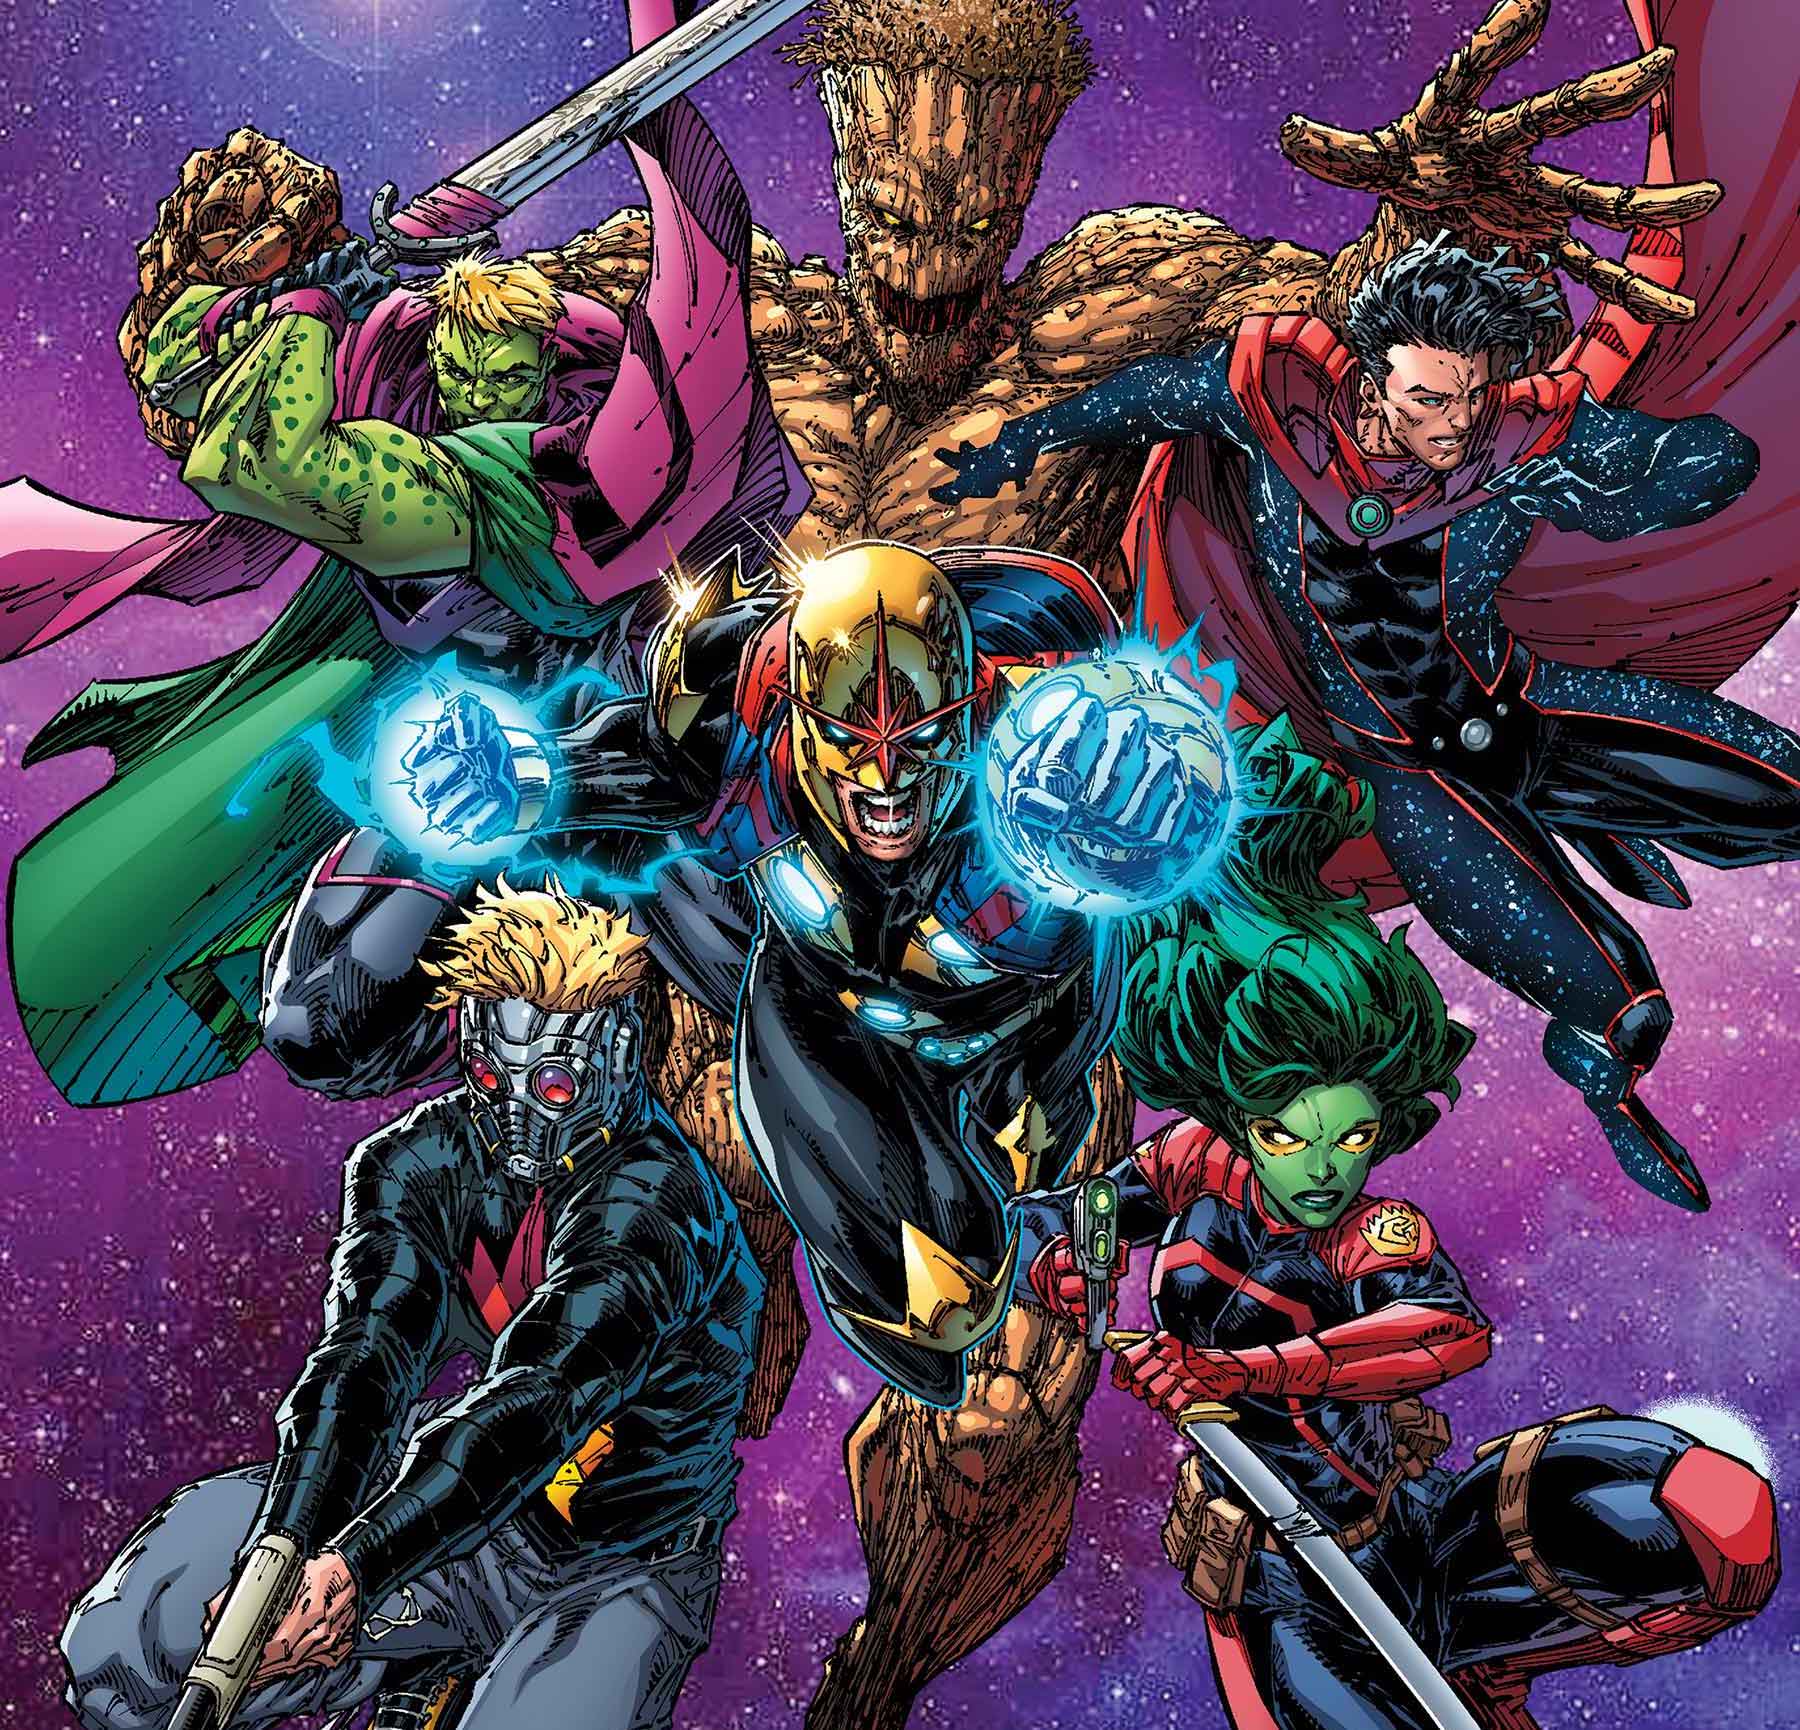 'Guardians of the Galaxy' #13 kicks off Marvel's new space age